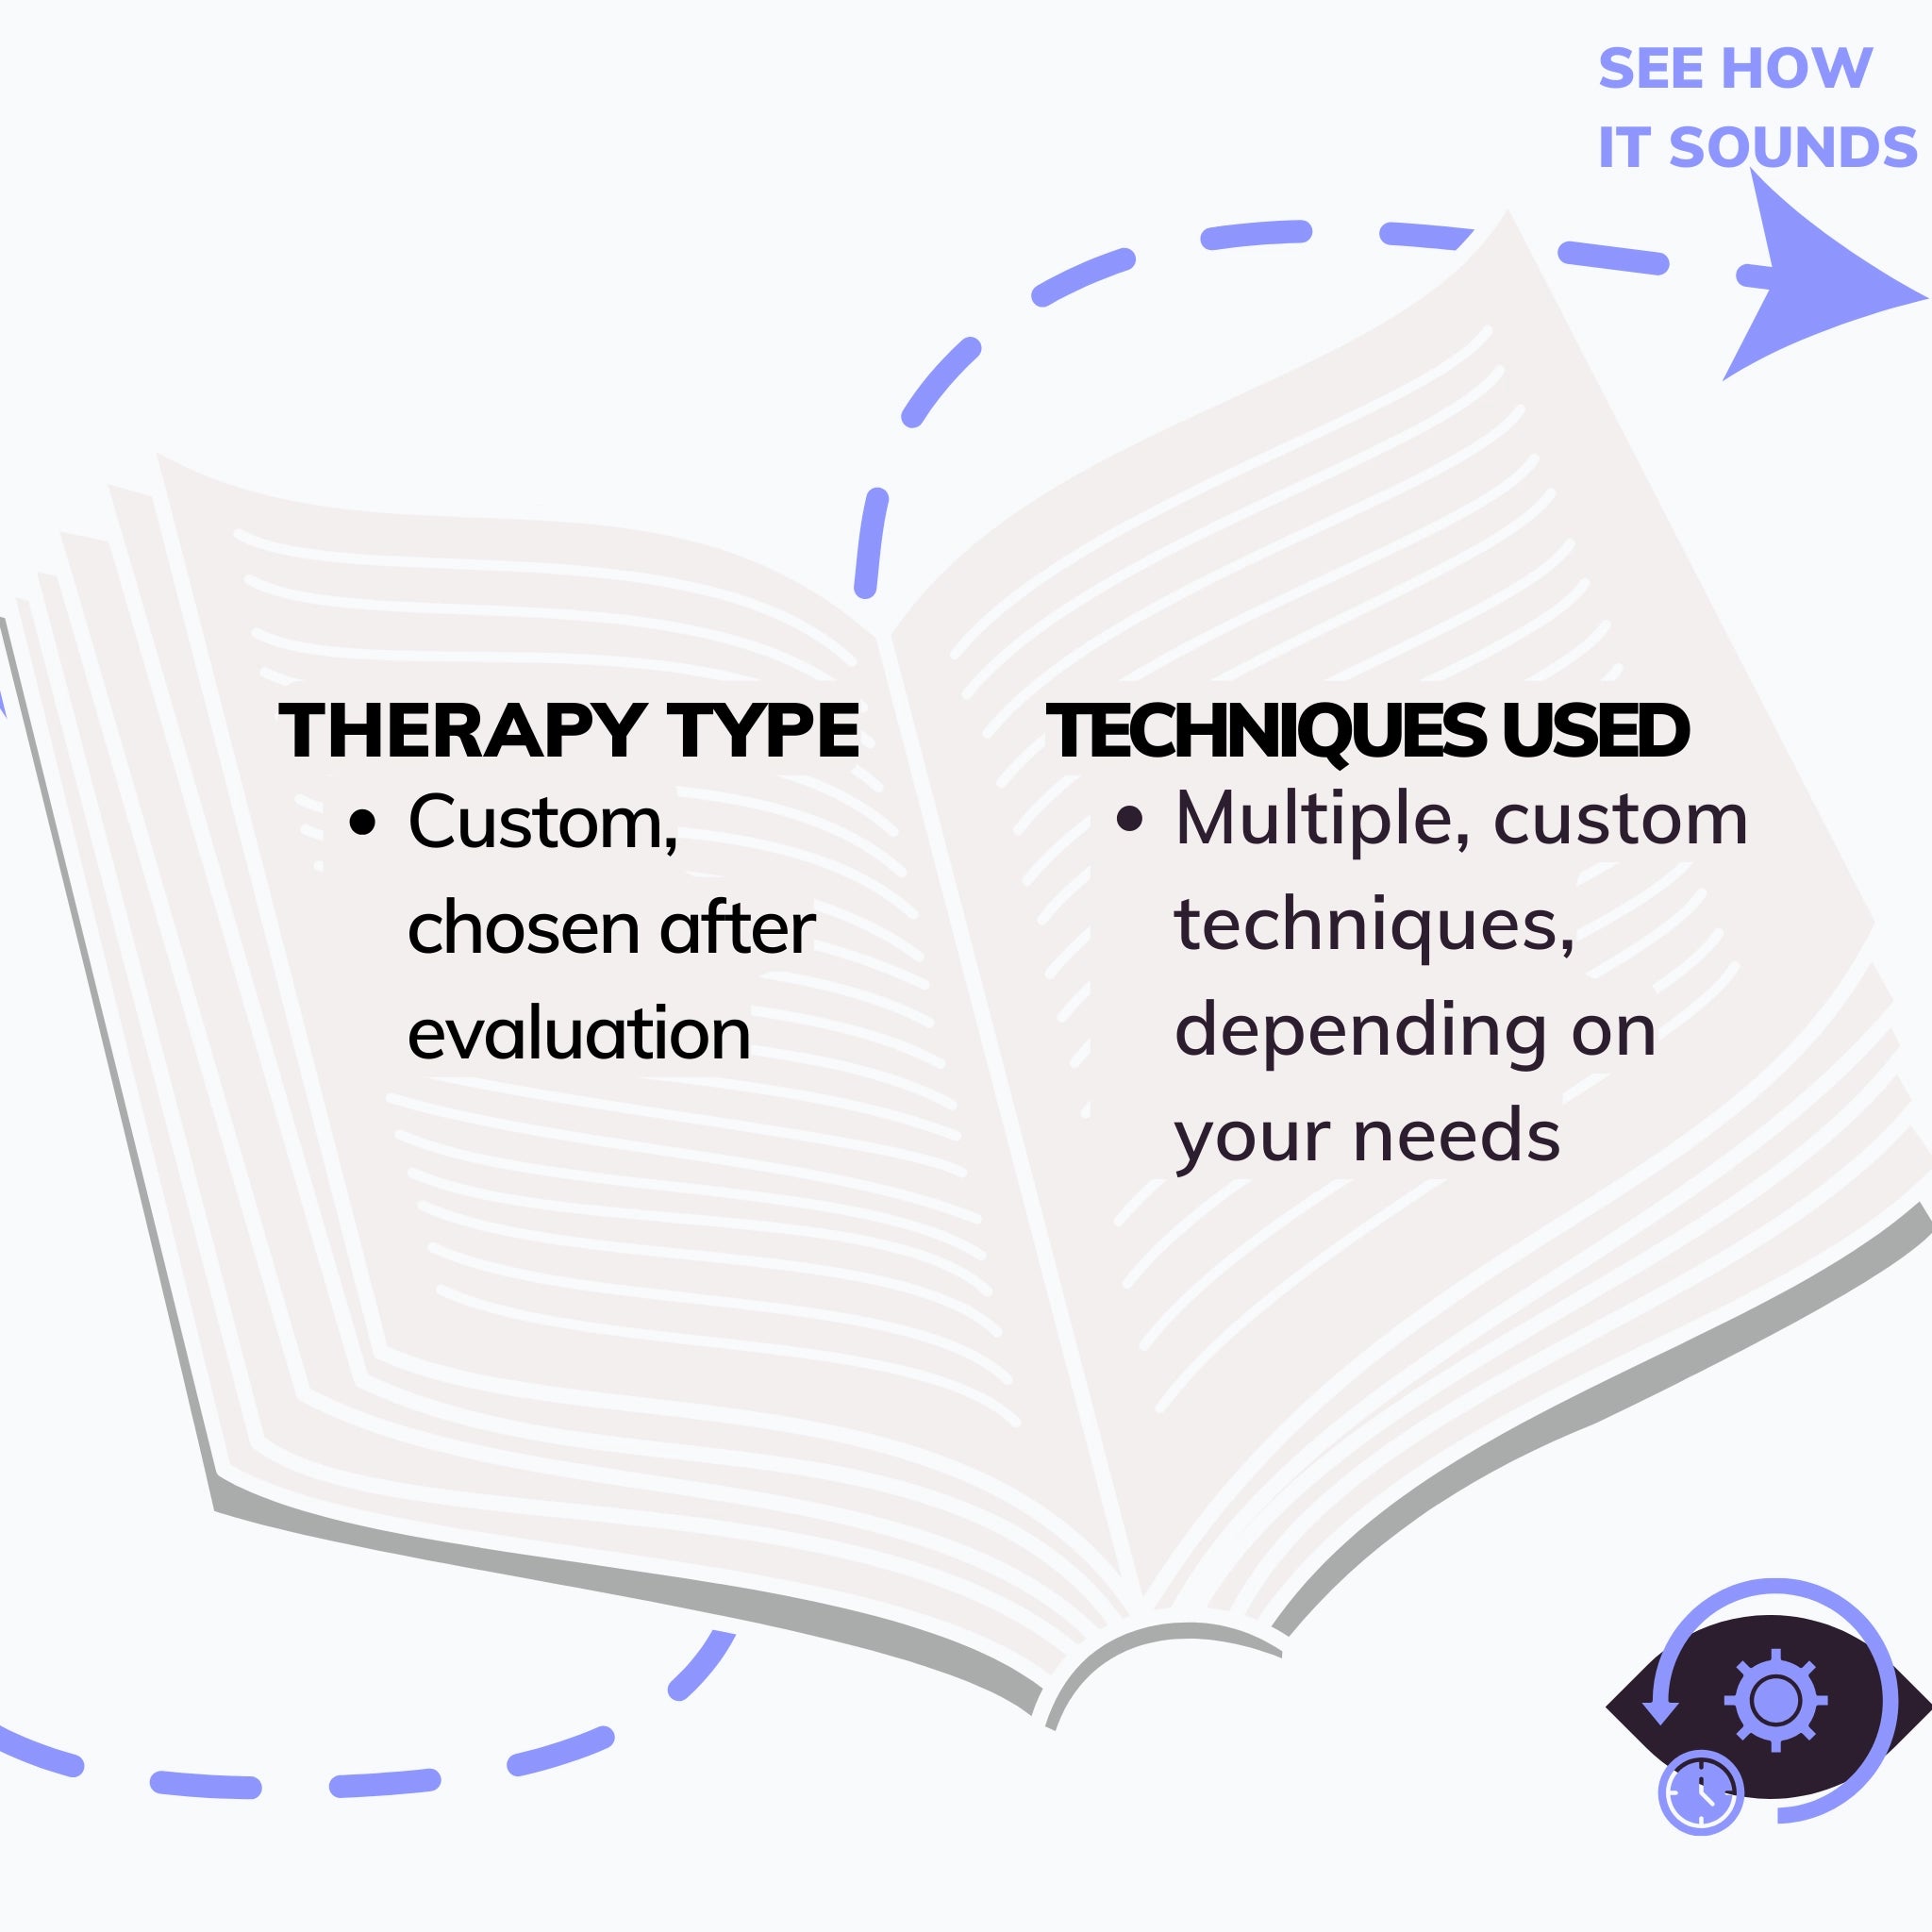 How it's made? The therapeutic elements are chosen by the therapists after evaluating your background and therapeutic goals